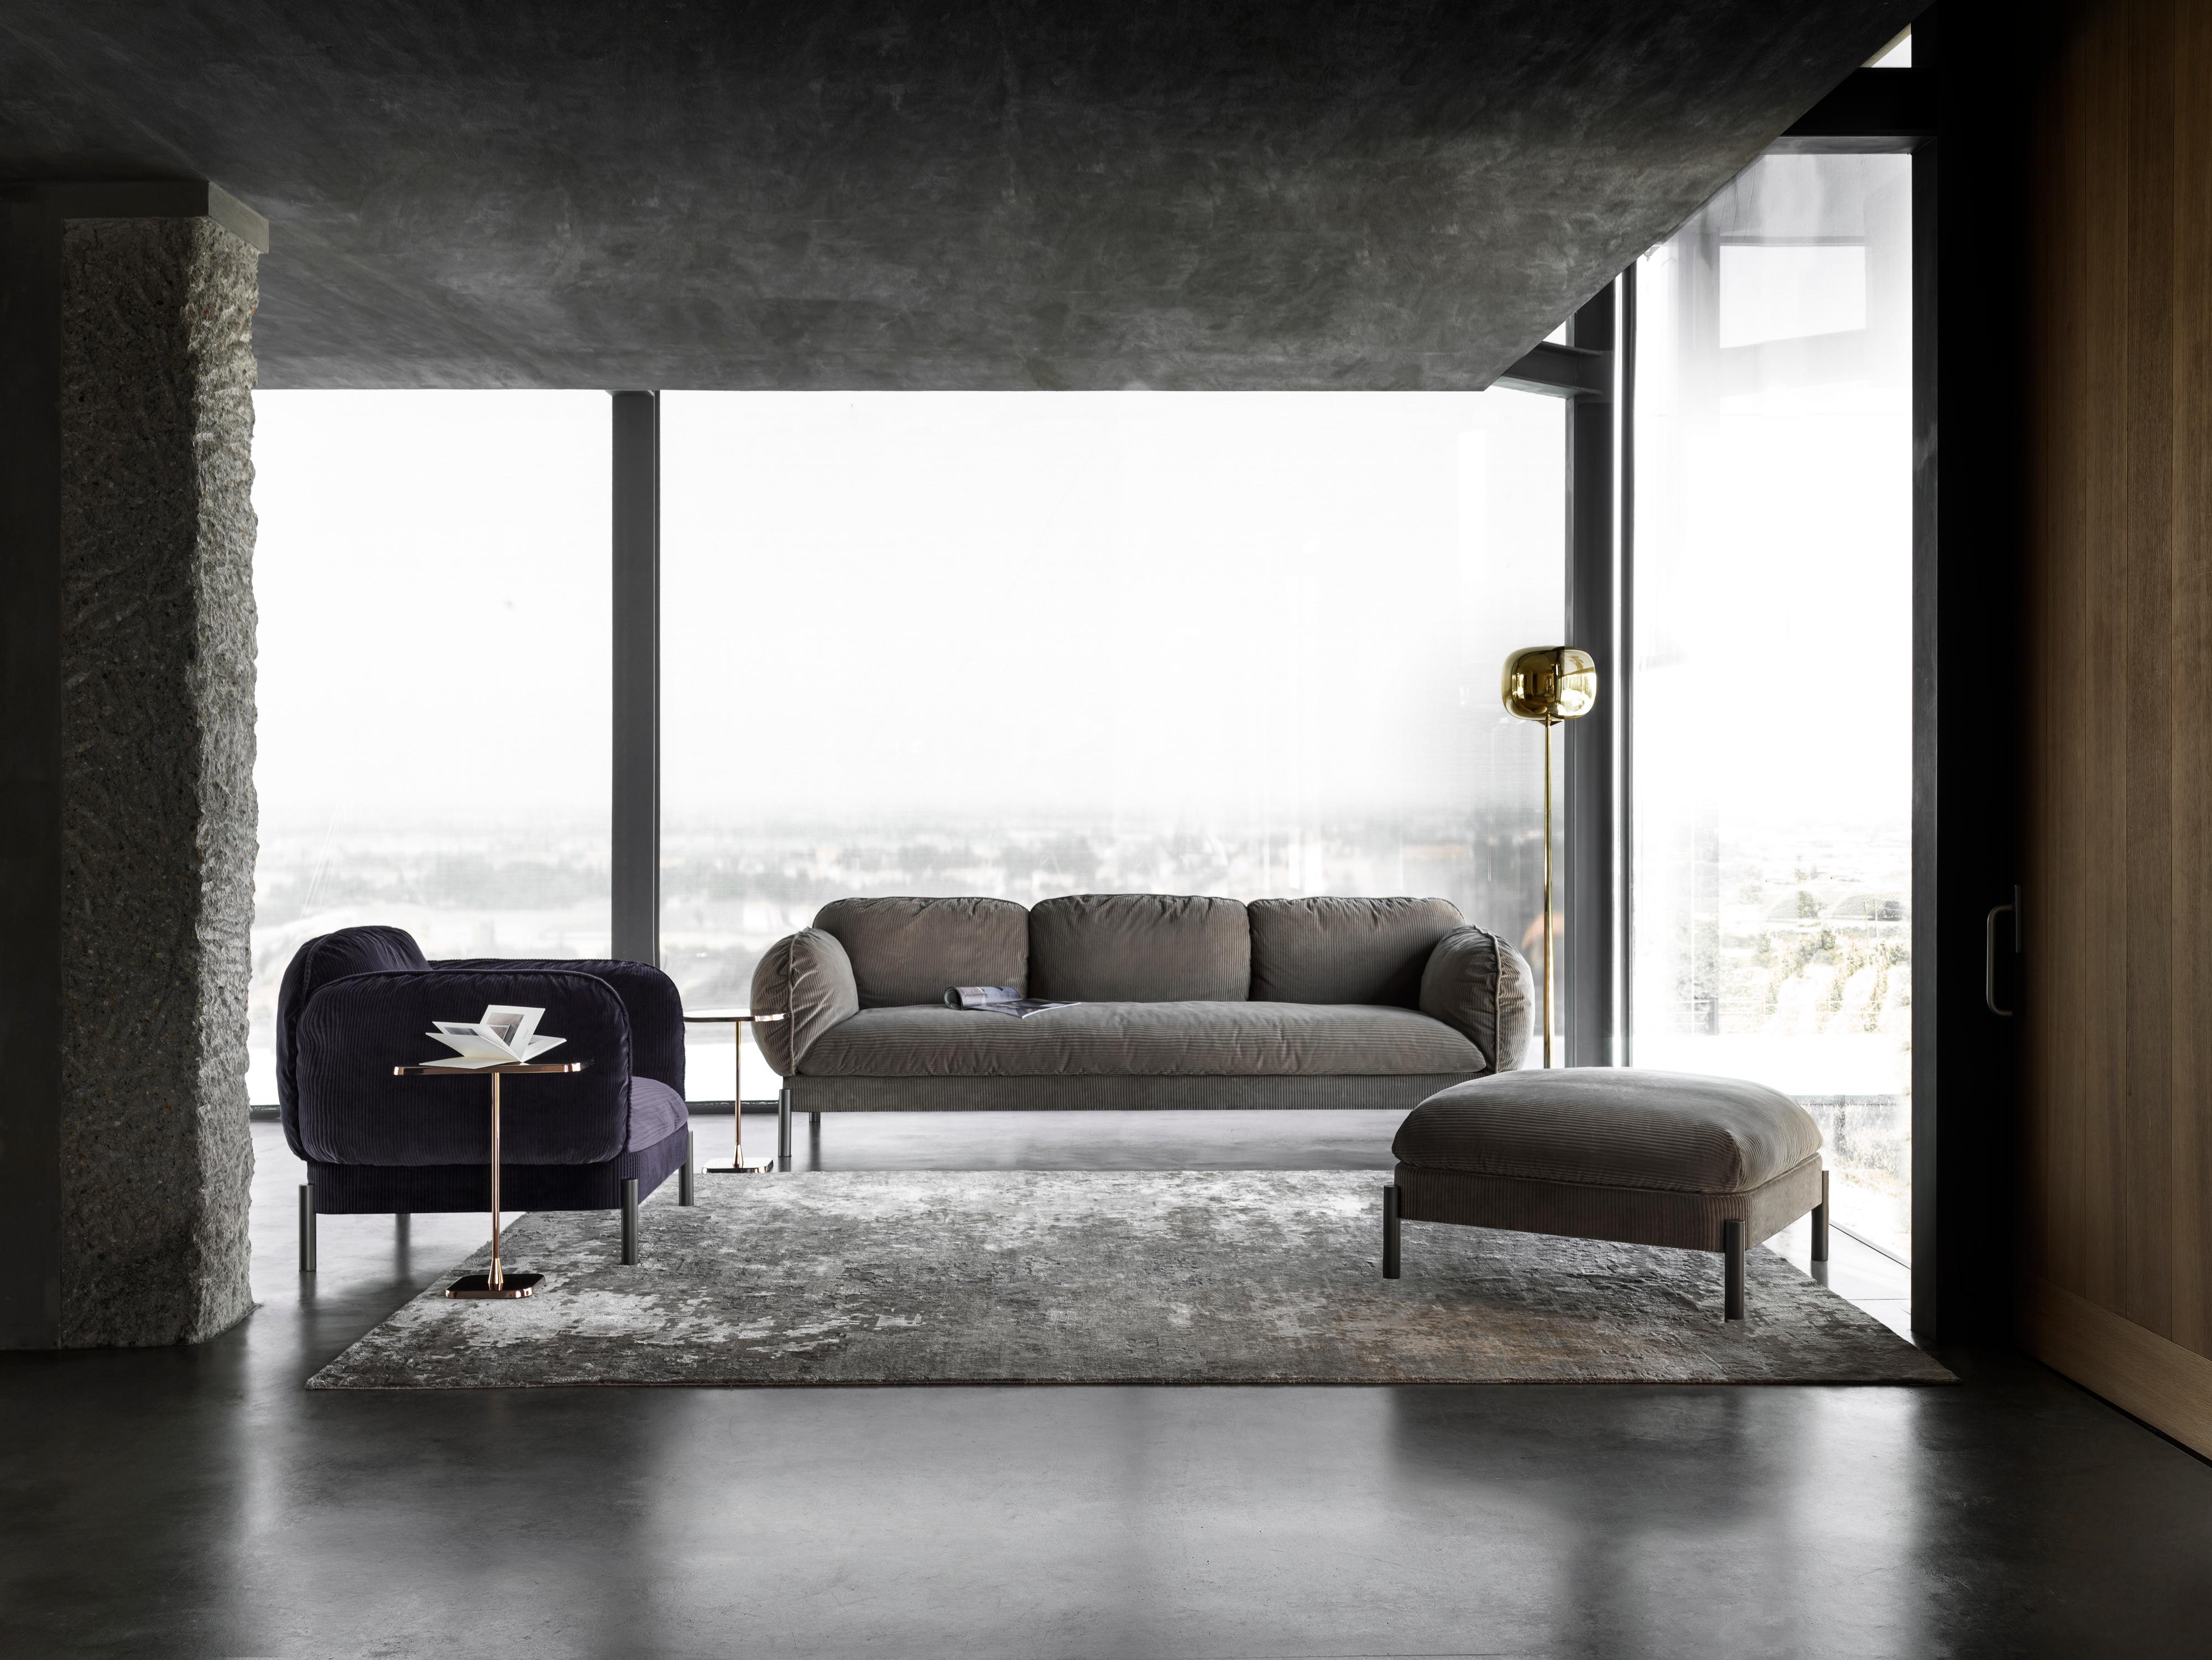 Soft and welcoming, this sofa is inspired by the 70’s; a decade that changed our culture forever through freedom and self-discovery. The Sofa invites you to a world of fantasy where you can indulge in the comfort and coziness of your